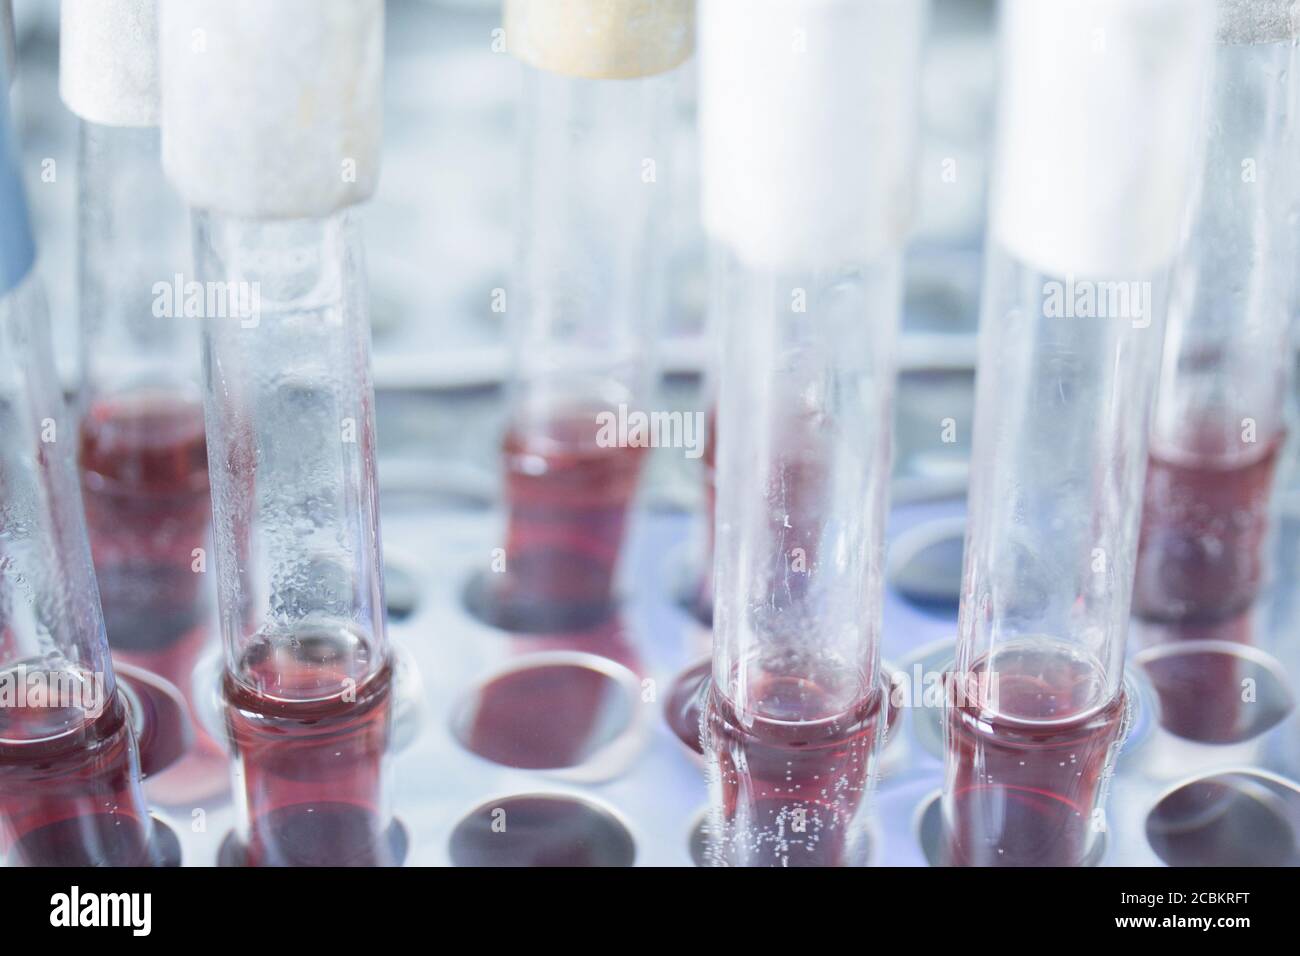 Close up of test tubes in lab Stock Photo